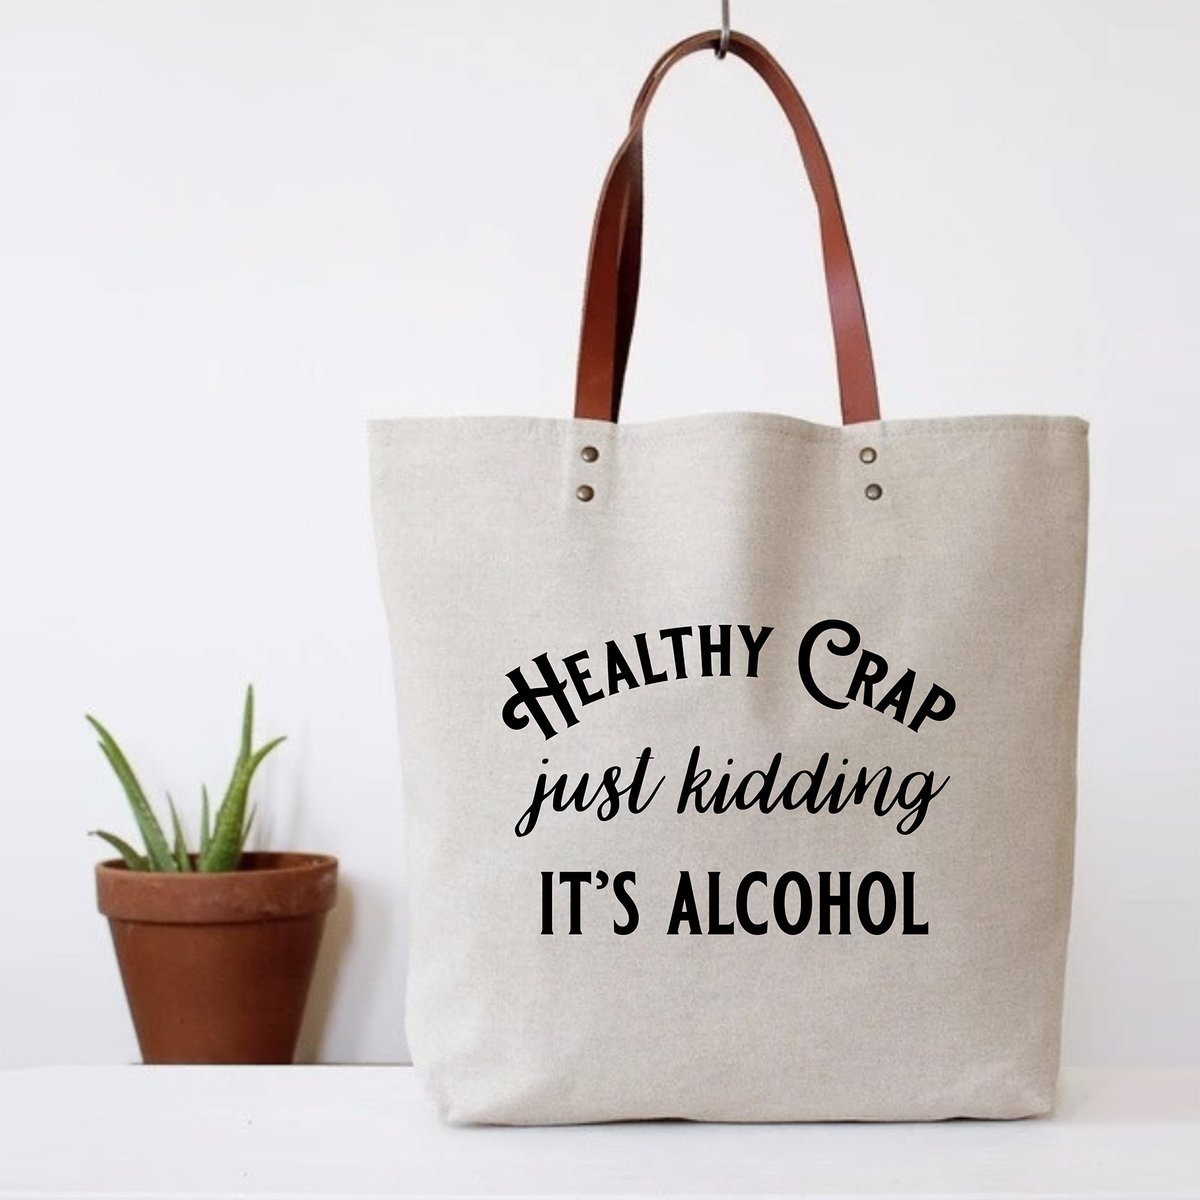 Healthy Crap Just Kidding It's Alcohol Canvas Tote Bag | Vegan Leather Handles